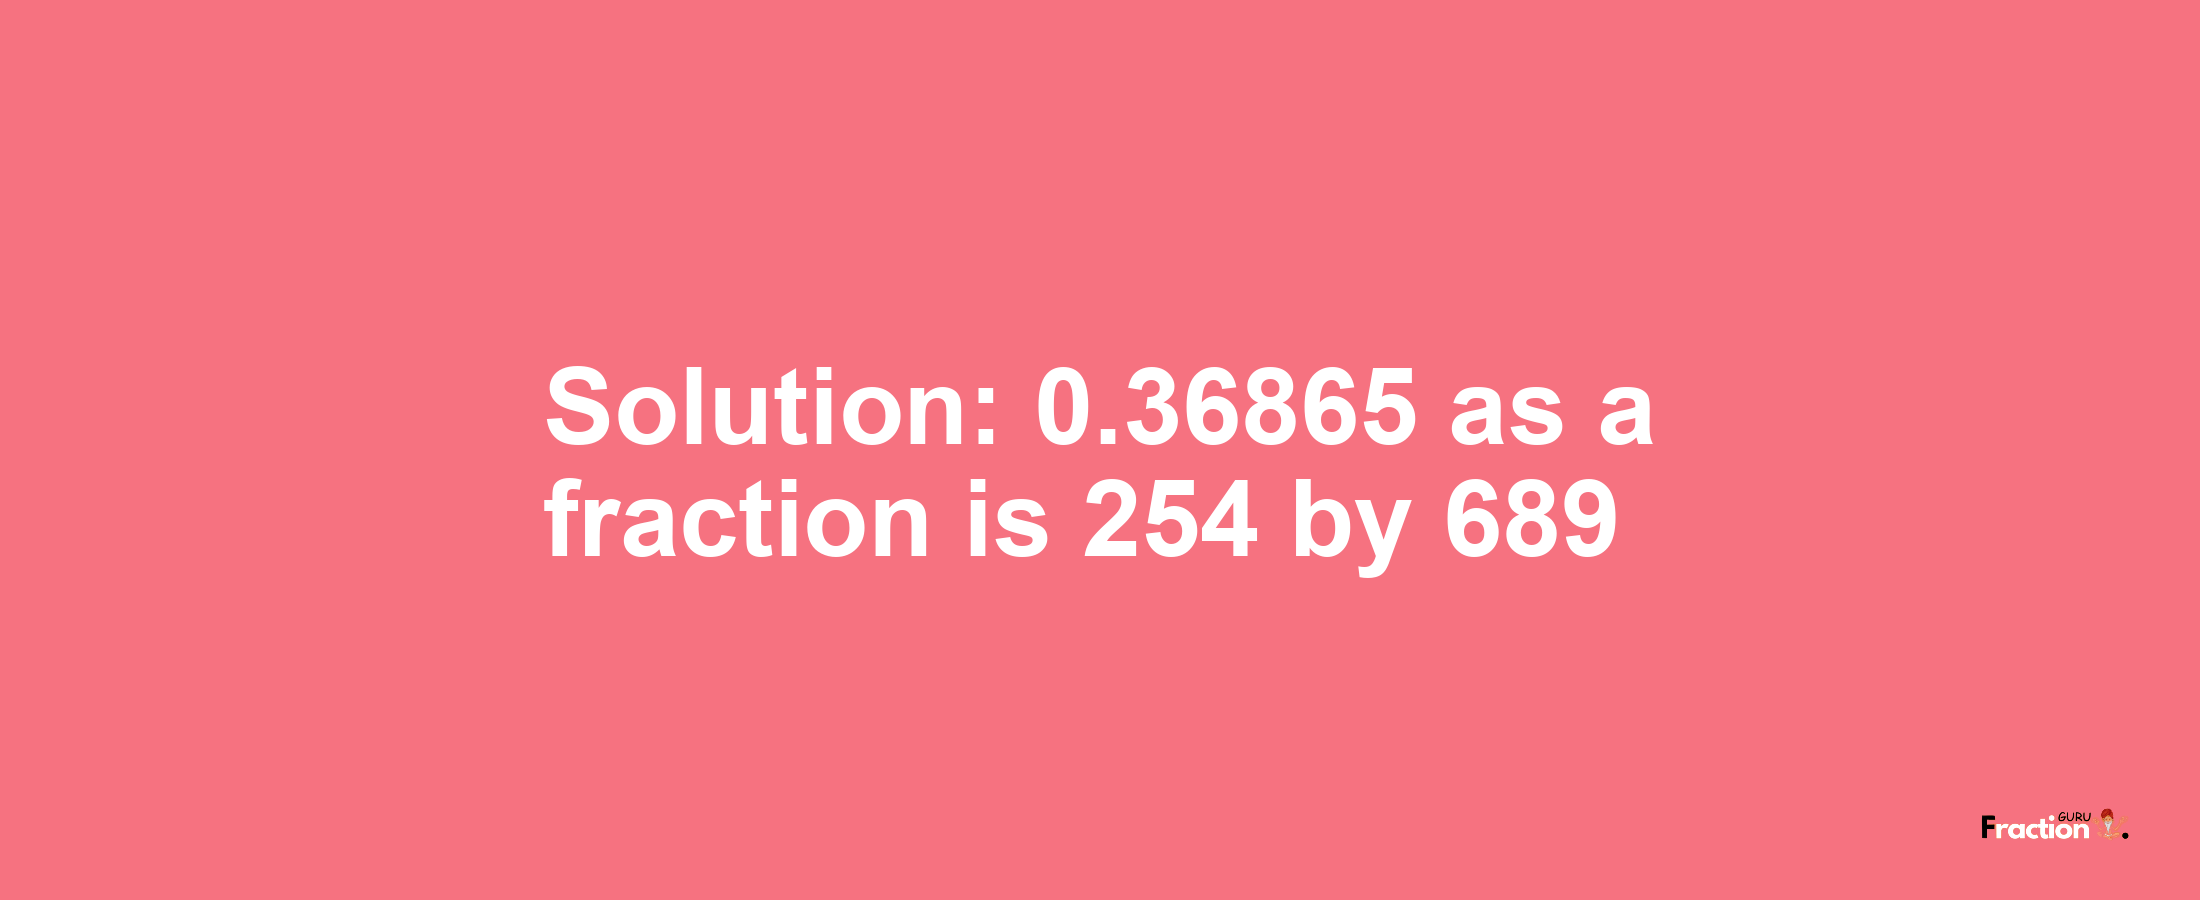 Solution:0.36865 as a fraction is 254/689